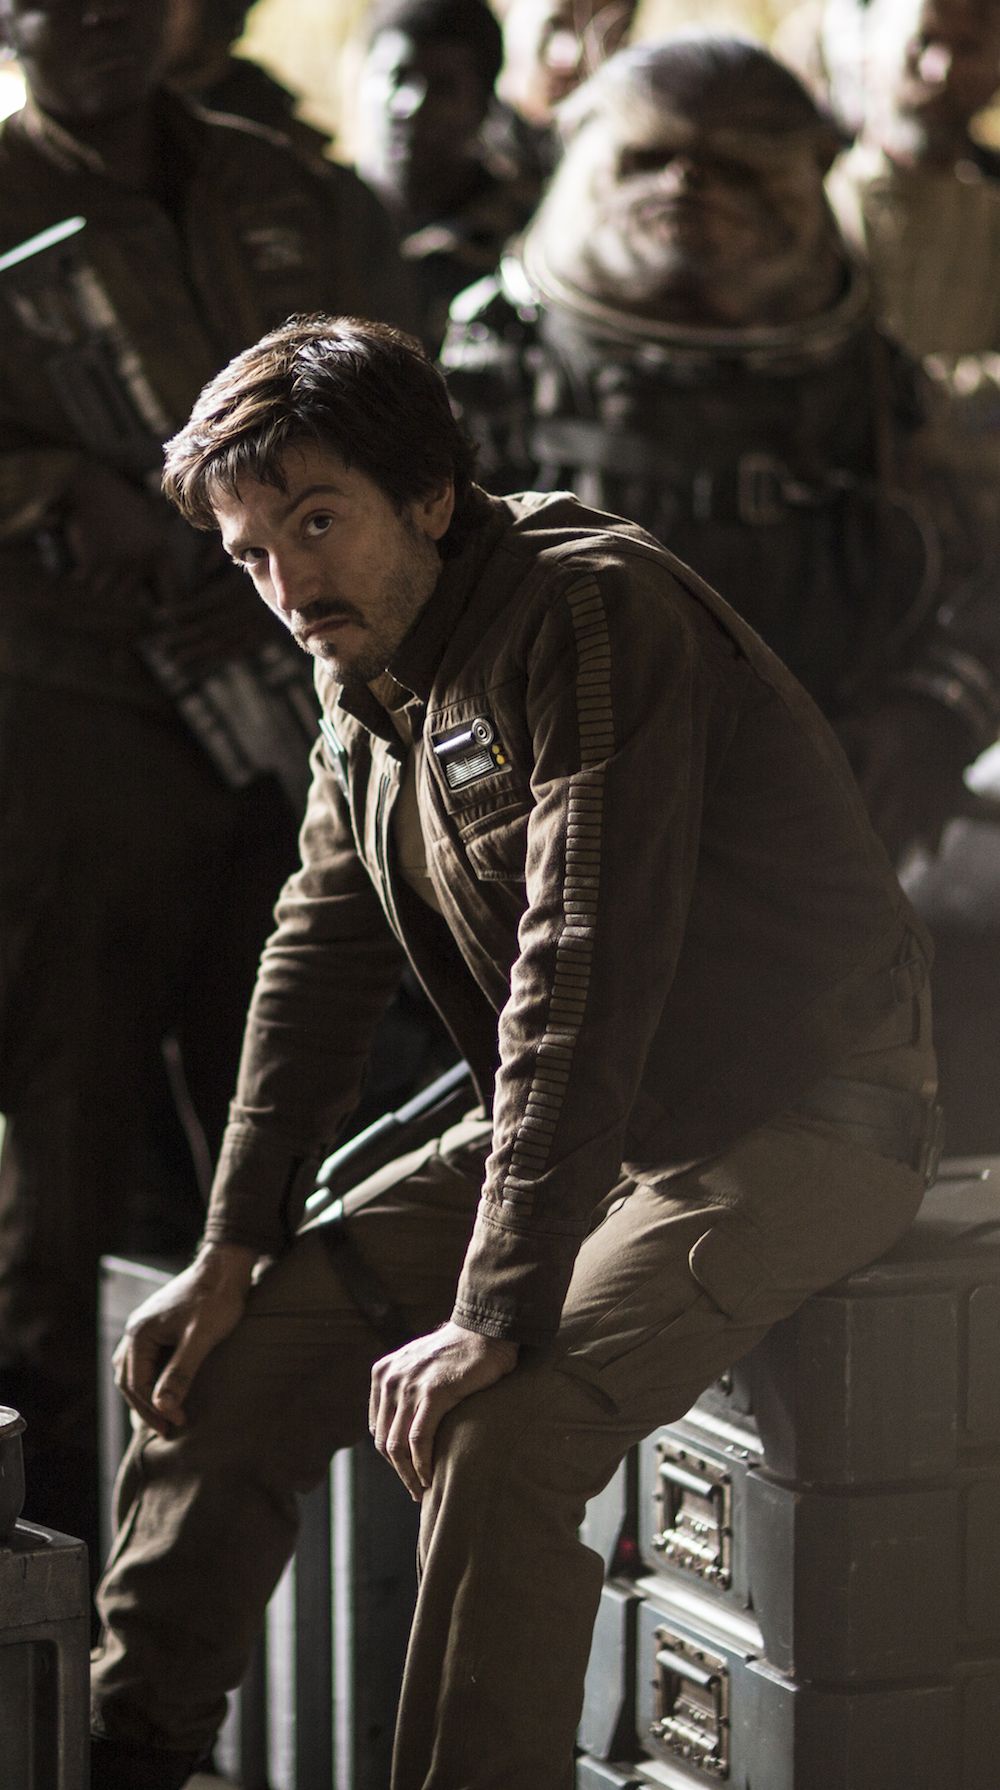 Diego Luna on the Power of Diversity in 'Rogue One: A Star Wars